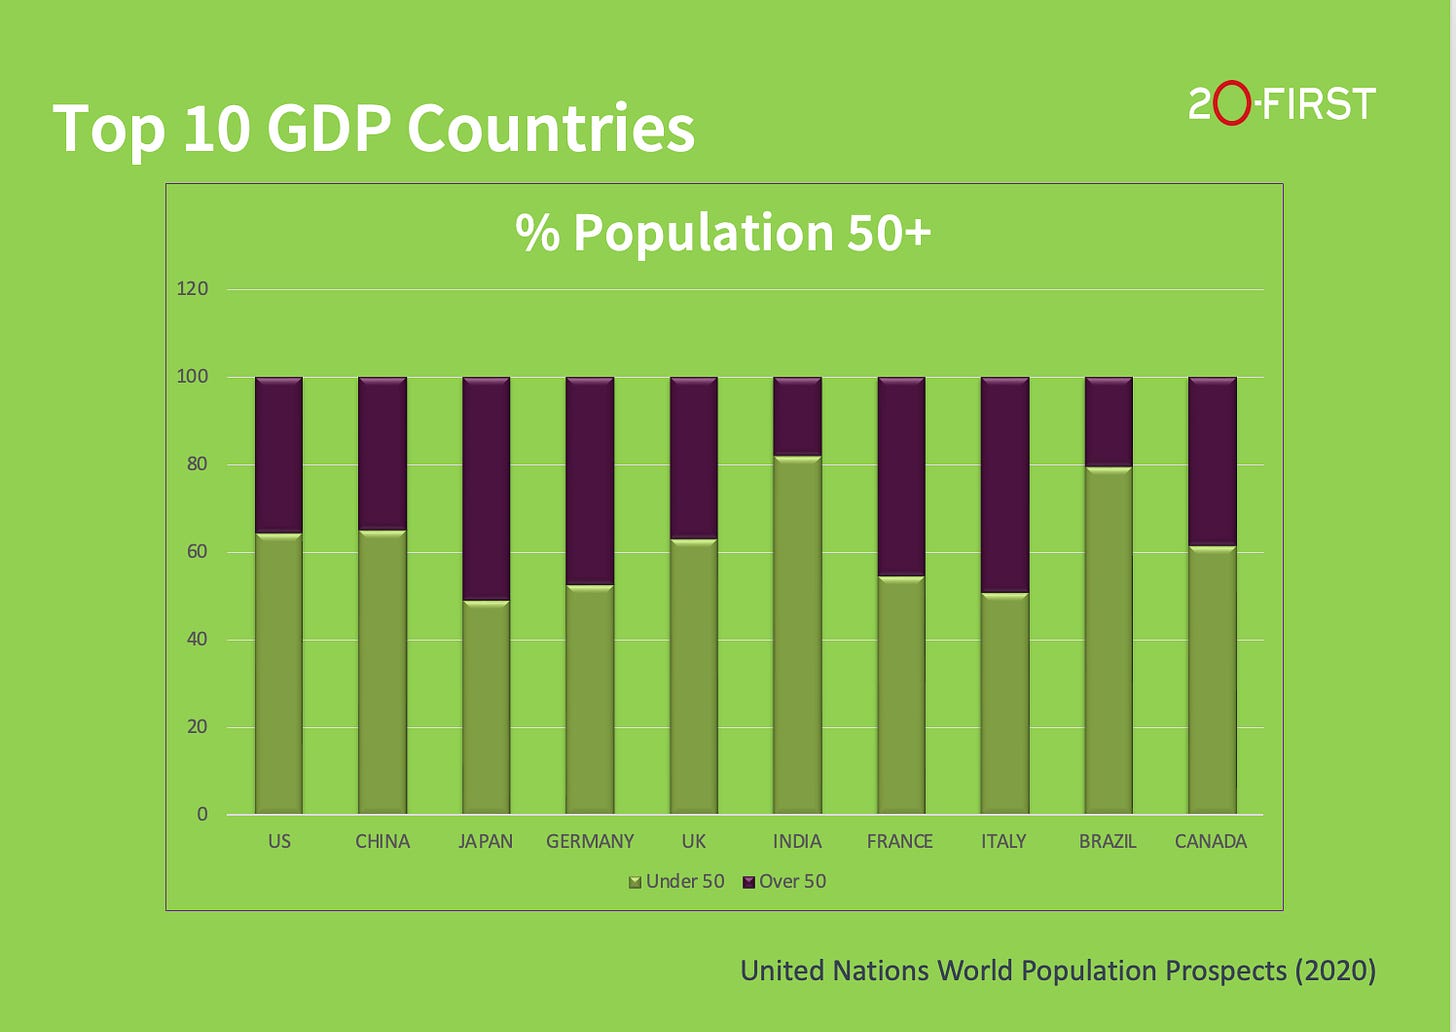 Over-50 Population of top 10 GDP countries demographics